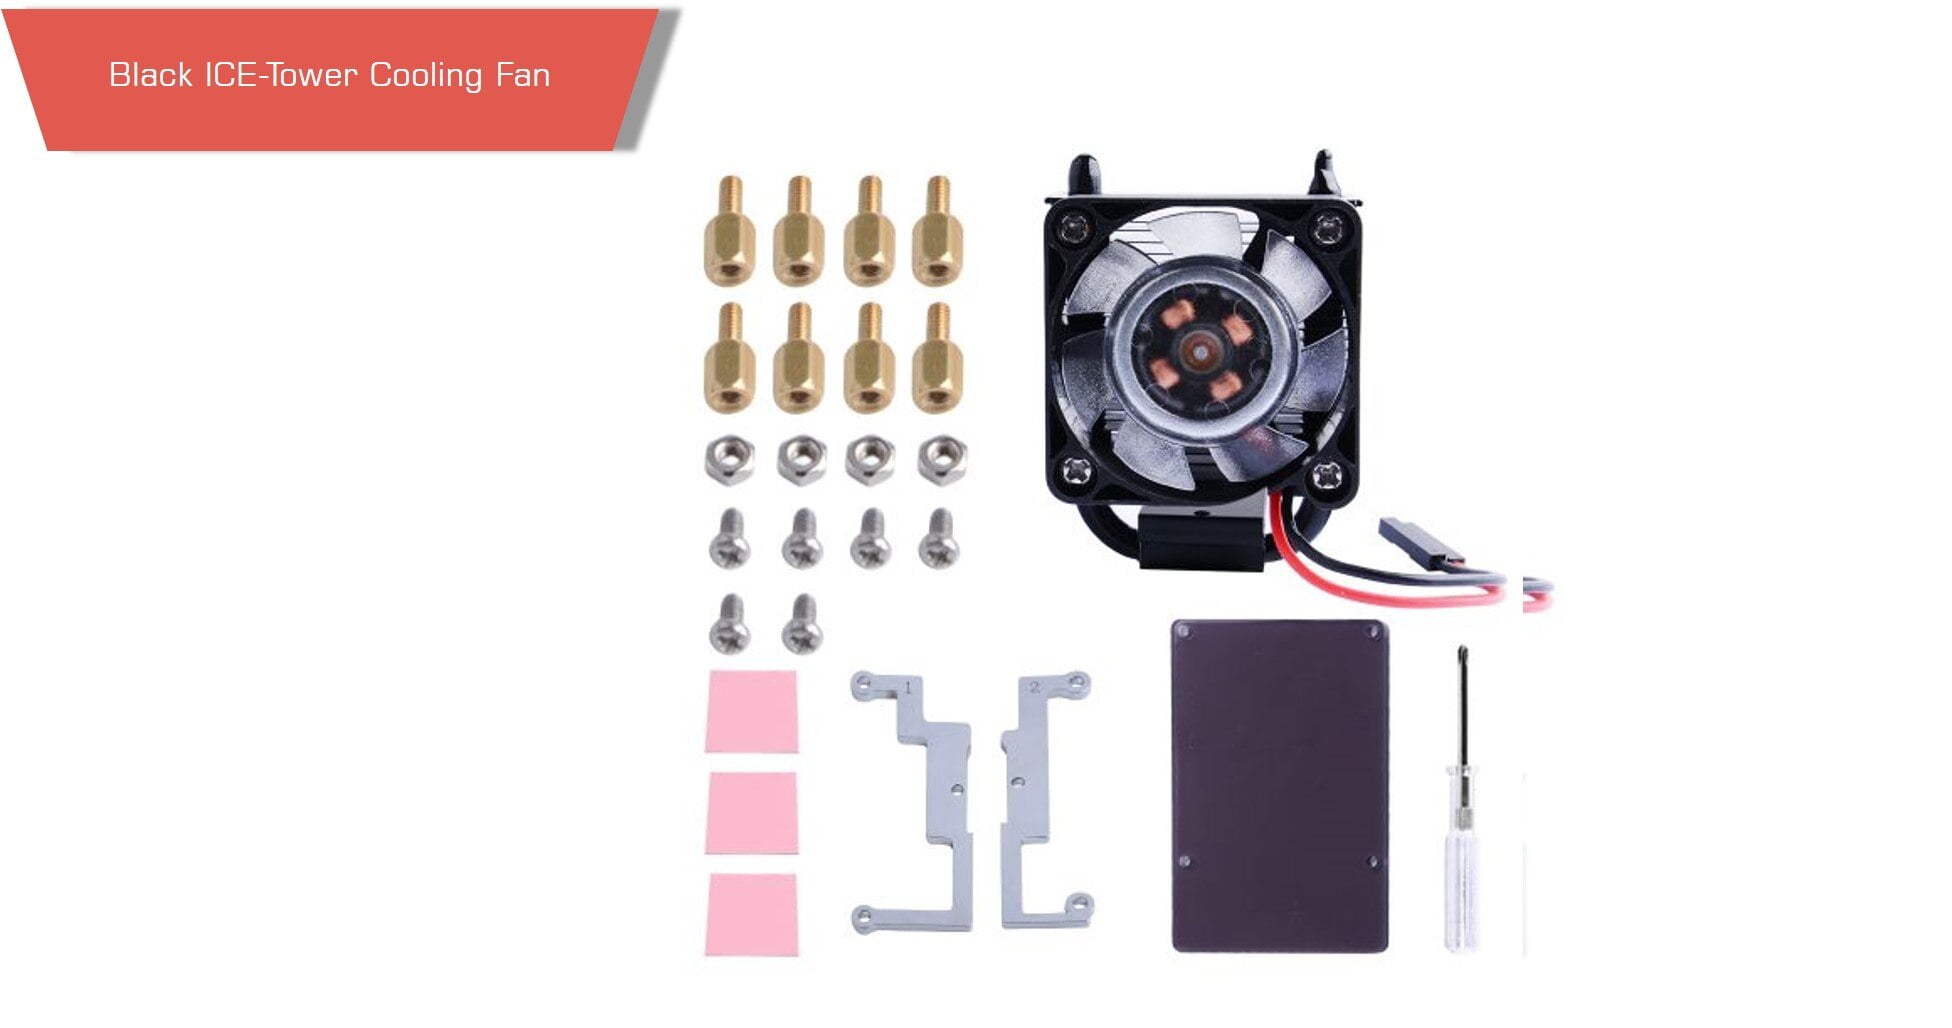 Ice-tower cpu cooling fan for raspberry pi 4b/3b/b white/black p8 motionew